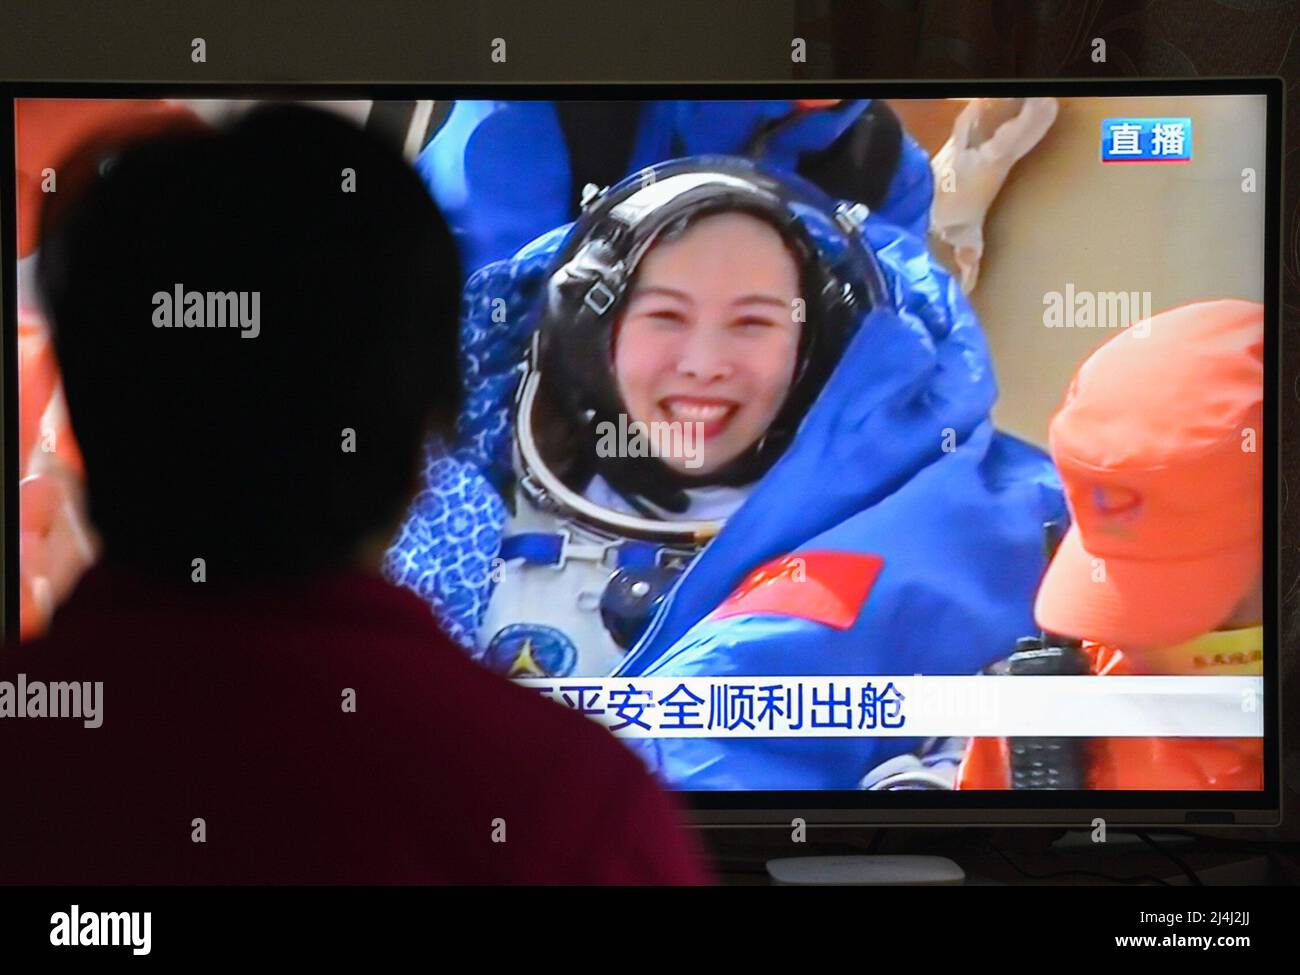 A woman watches a live TV broadcast of the successful landing of the Shenzhou XIII re-entry module with the astronaut Wang Yaping in the background. After orbiting Earth for six months, the three crew members of China's Shenzhou XIII mission departed from the Tiangong space station. They returned to the mother planet on Saturday morning, finishing the nation's longest human-crewed spaceflight. Major General Zhai Zhigang, the mission commander, Senior Colonel Wang Yaping, and Senior Colonel Ye Guangfu breathed fresh air for the first time after the half-year space journey as ground recovery per Stock Photo